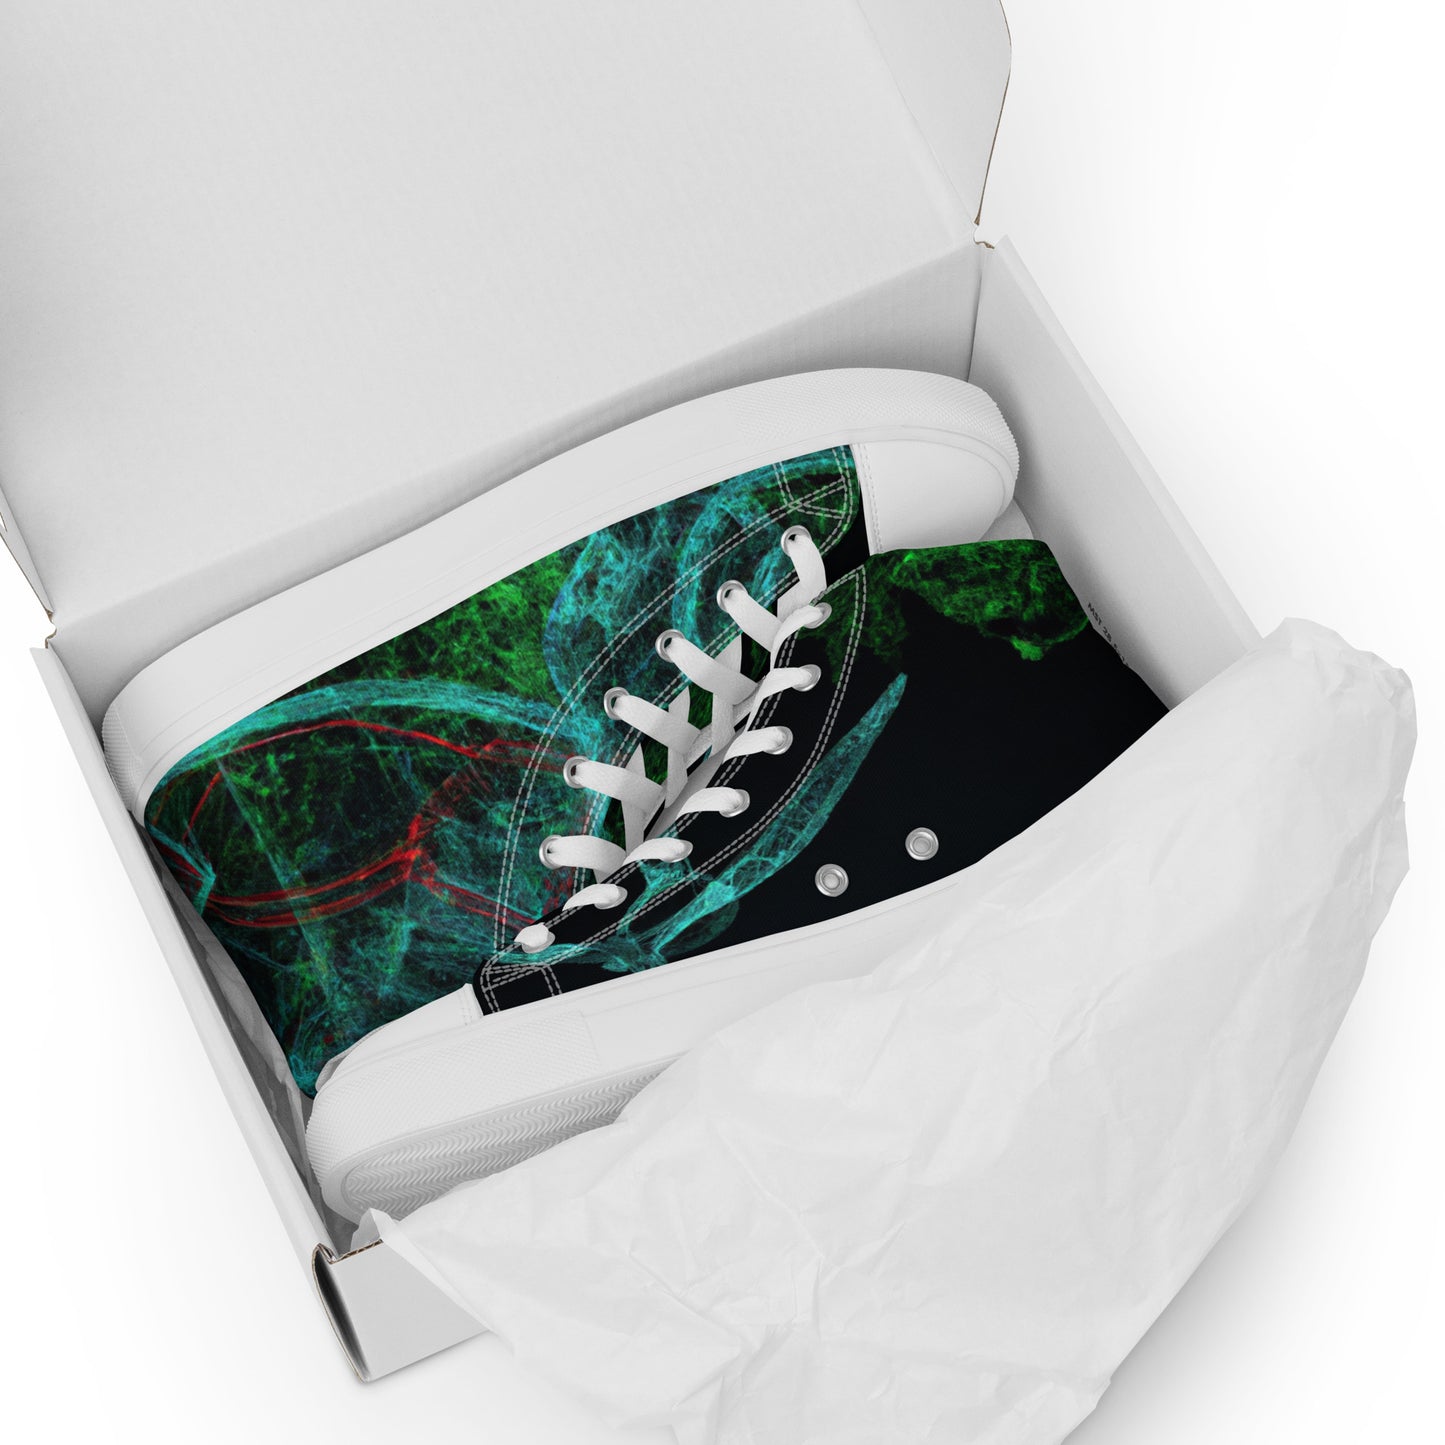 Elevate Your Style: Unique Dark Green Abstract High Tops | Limited Edition